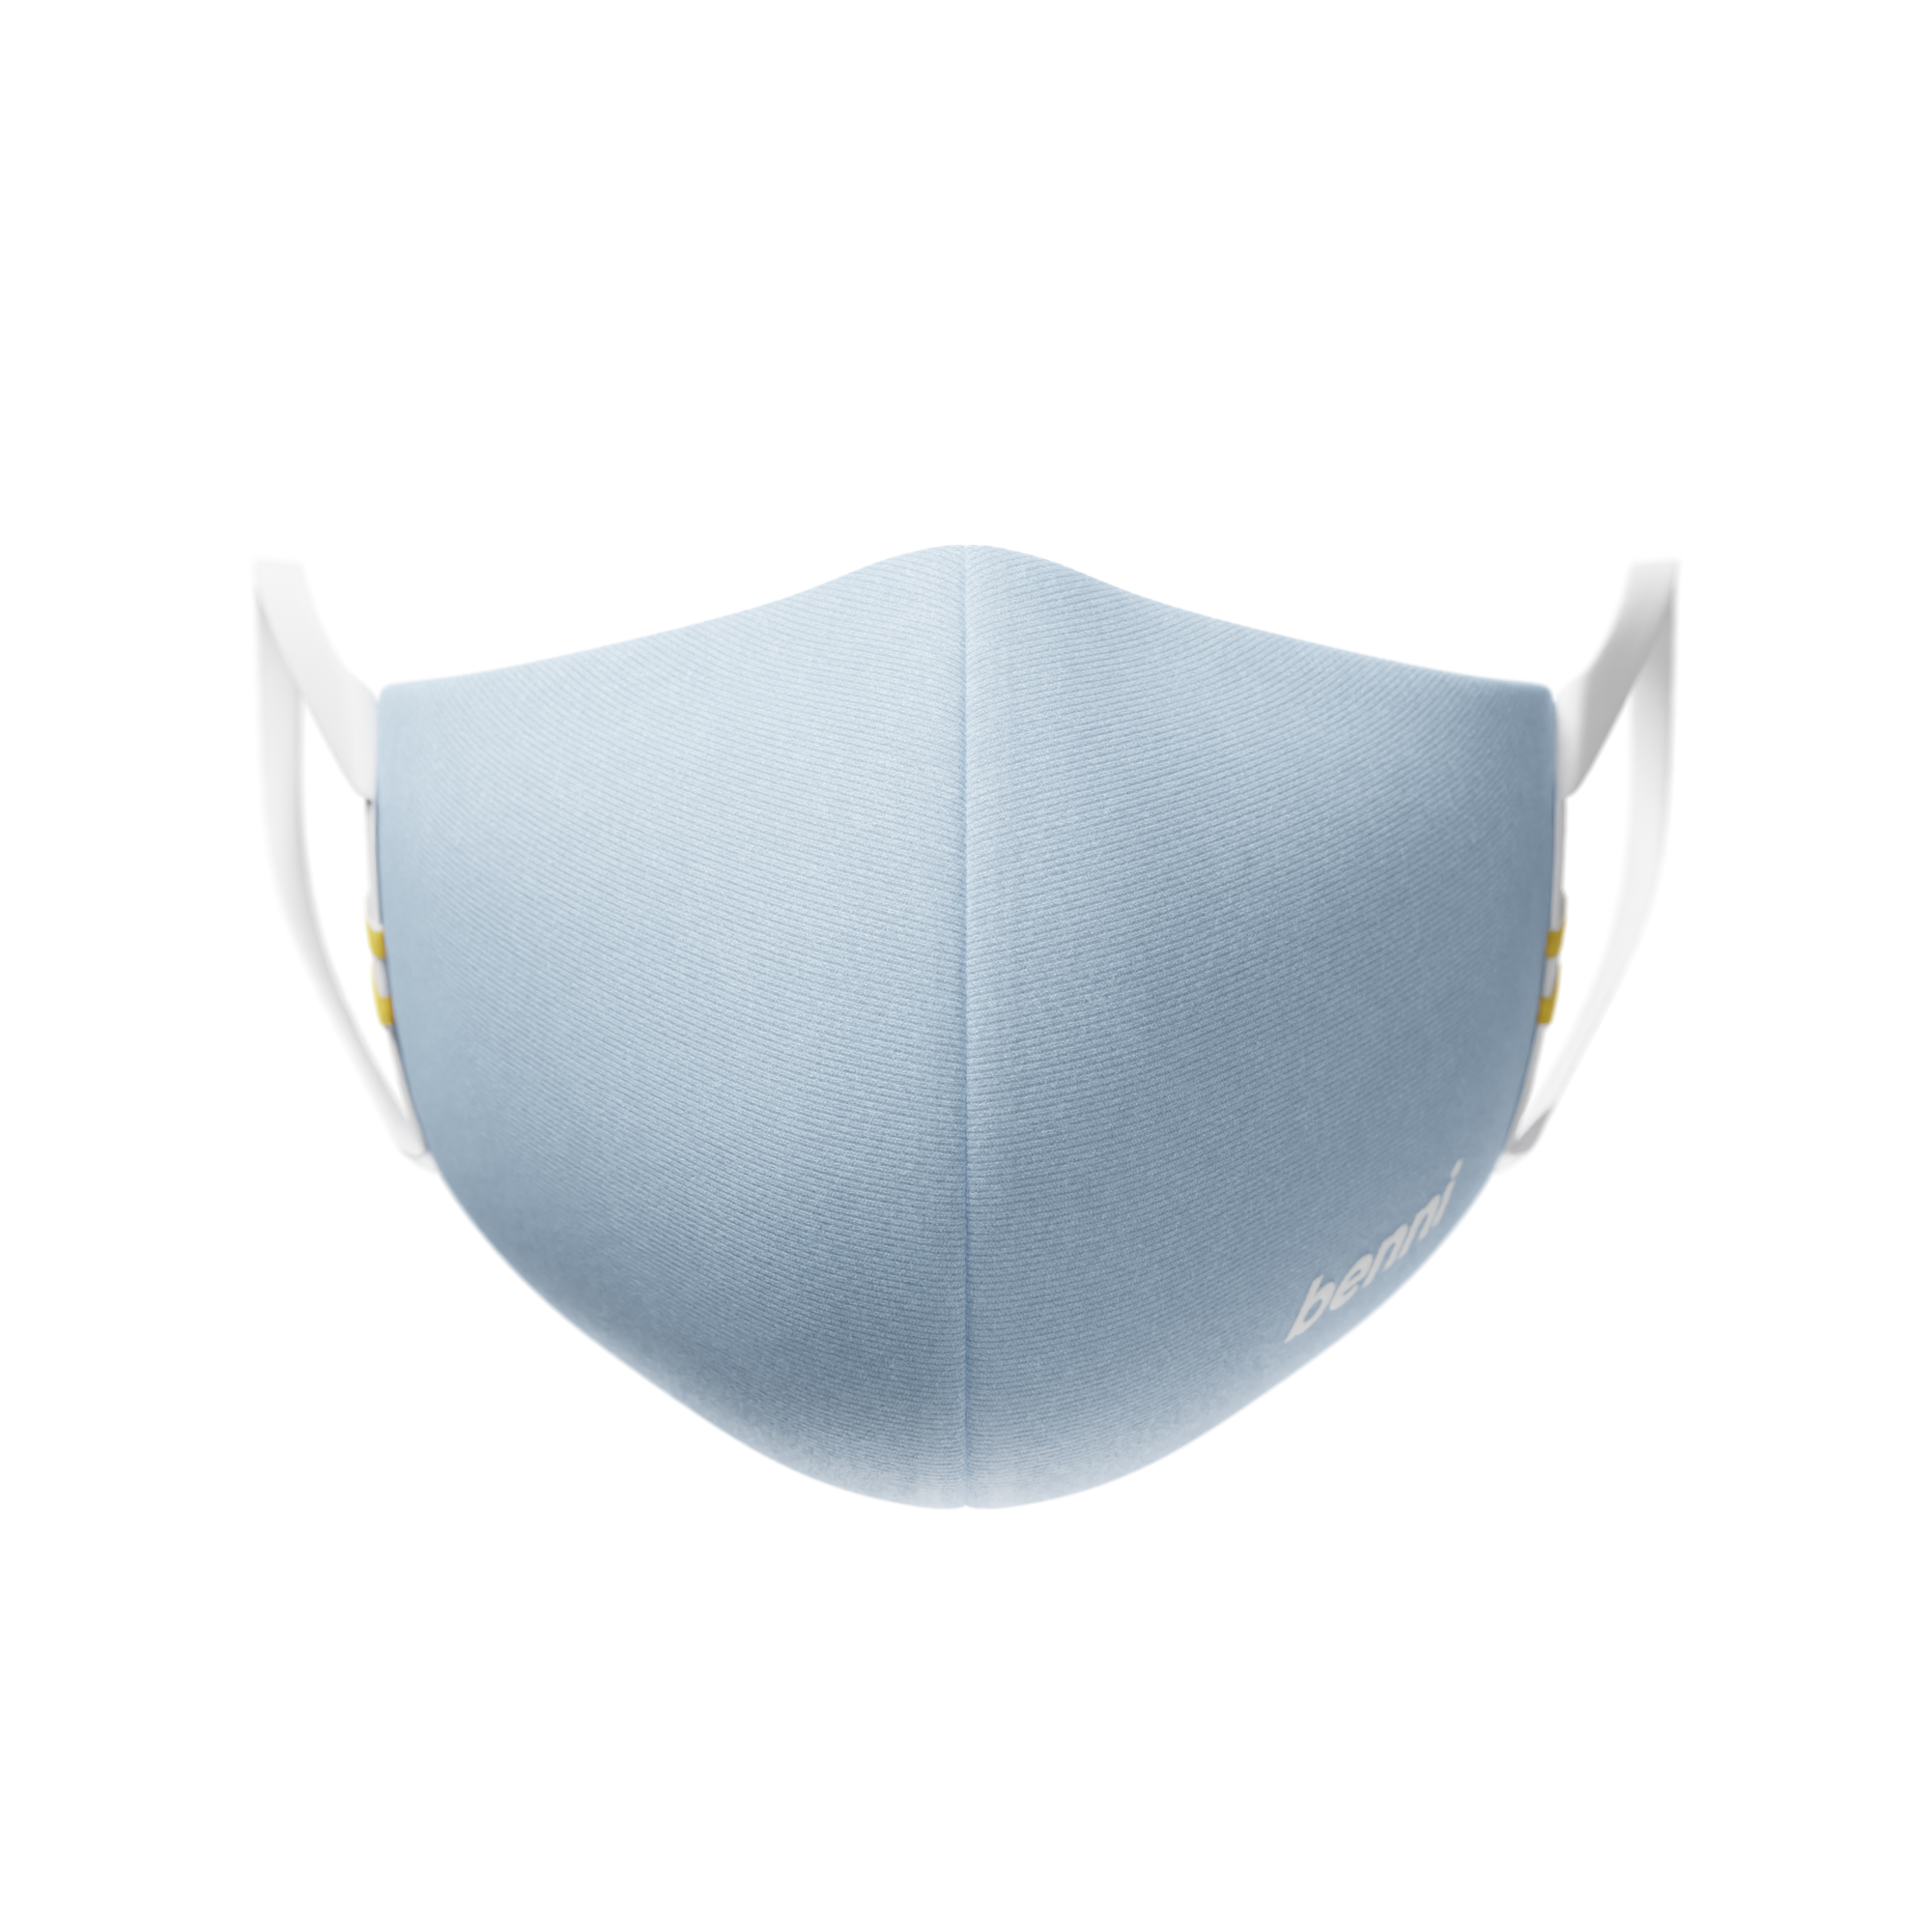 Announcement: Recent Design and Functionality Changes to the Benni Mask